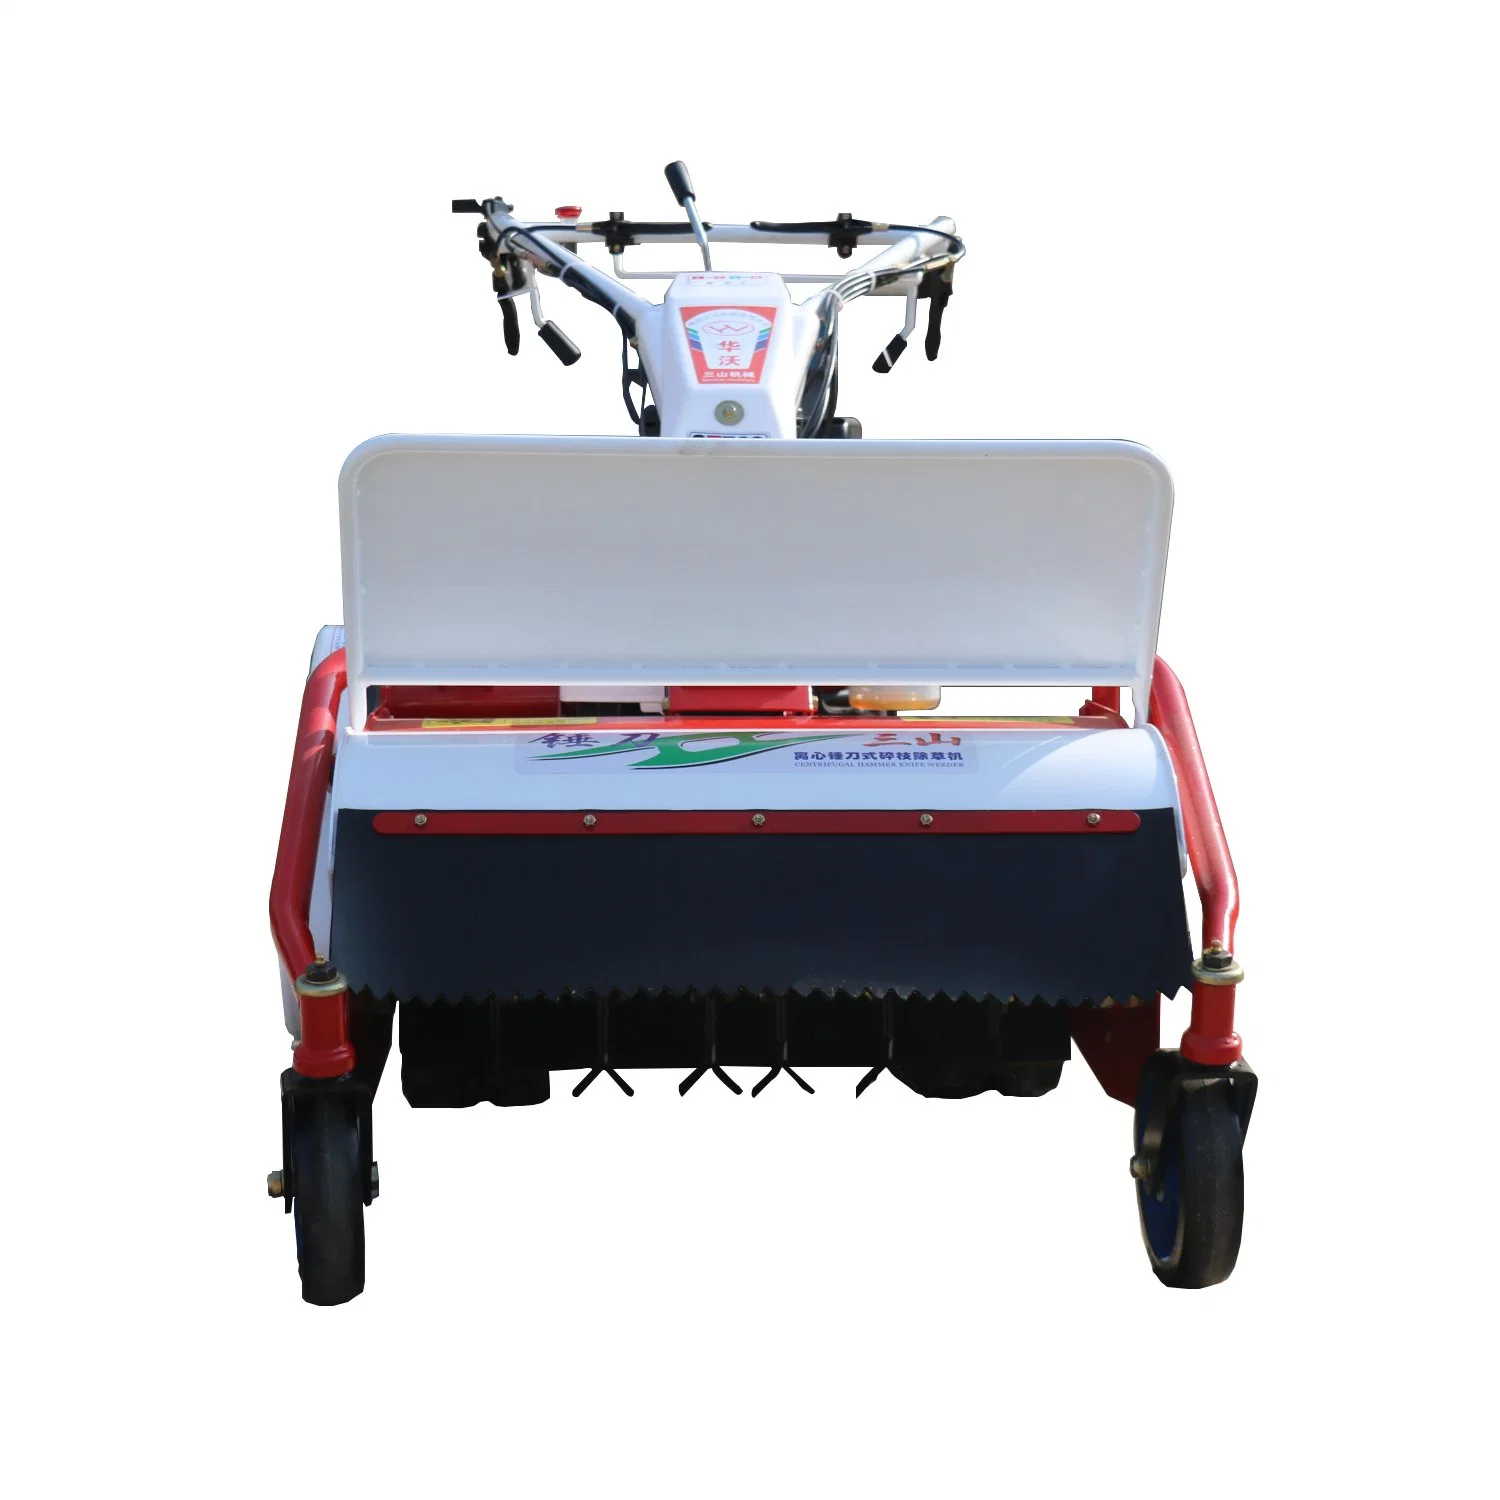 Multi-Function Automatic Garden Lawn Mower Crawler Lawn Mower Rotary Mower Weed Cutter